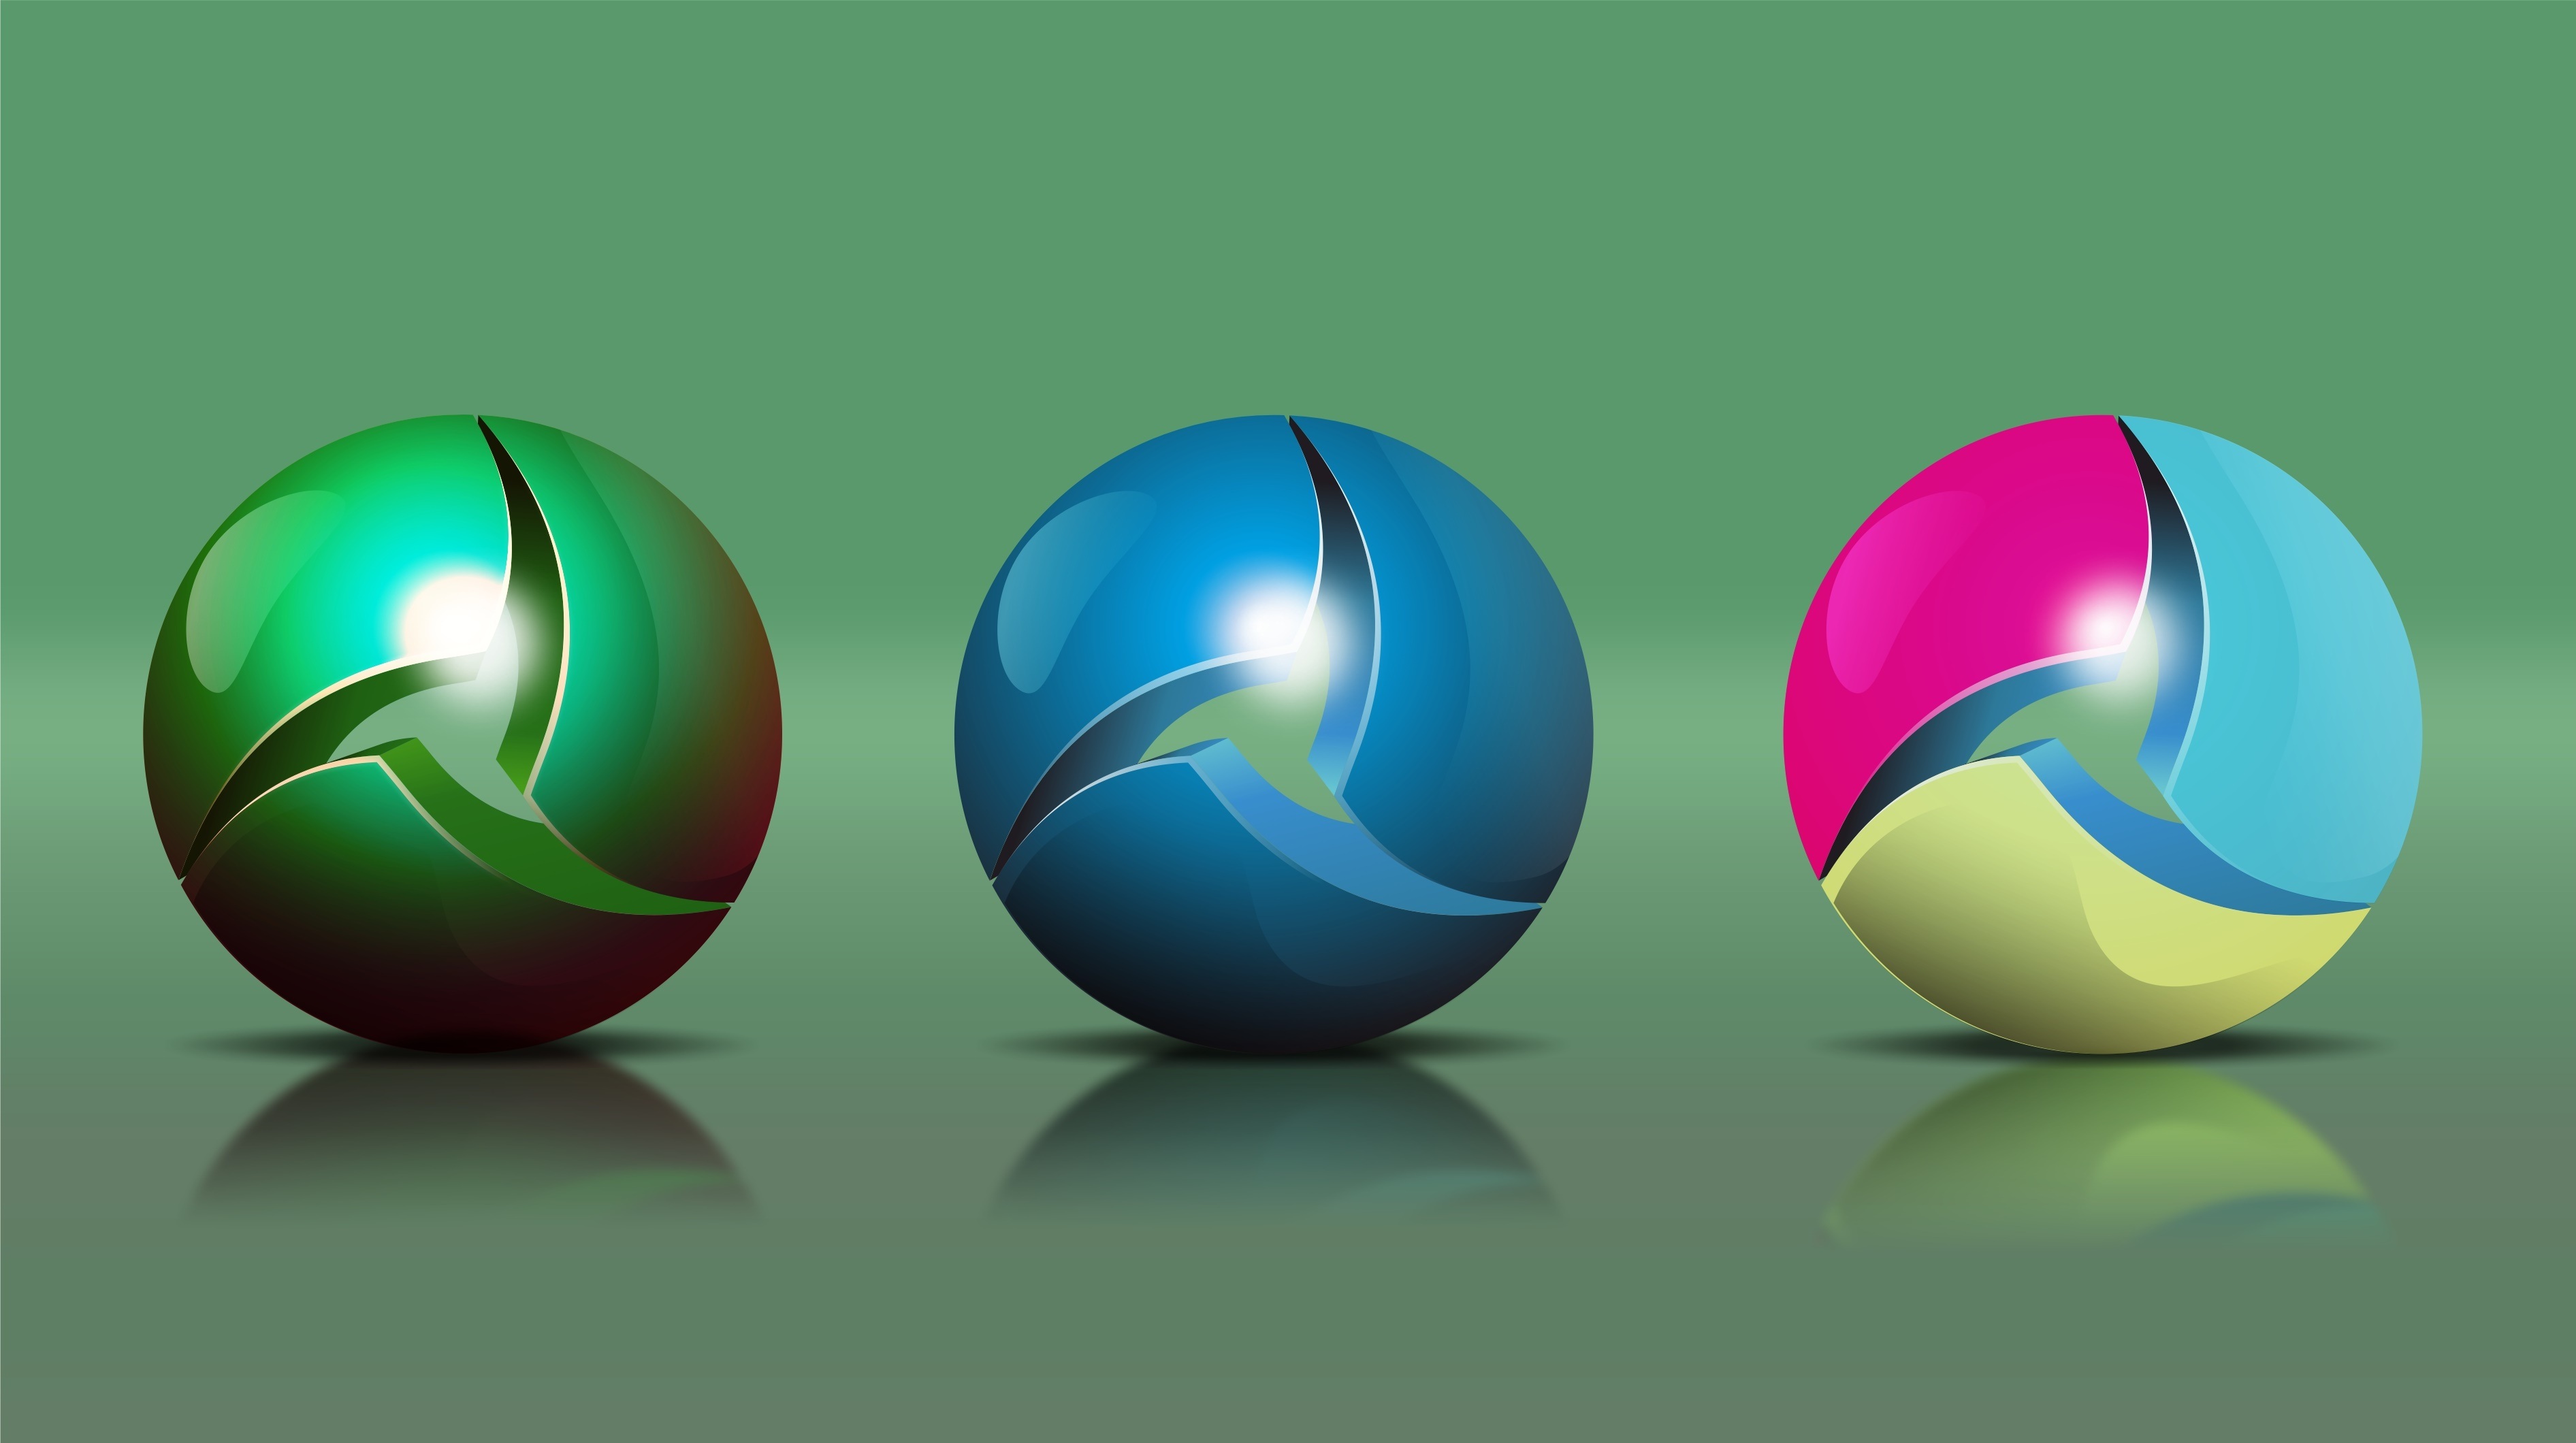 sphere, balls, 3d, reflection, form, forms, spheres